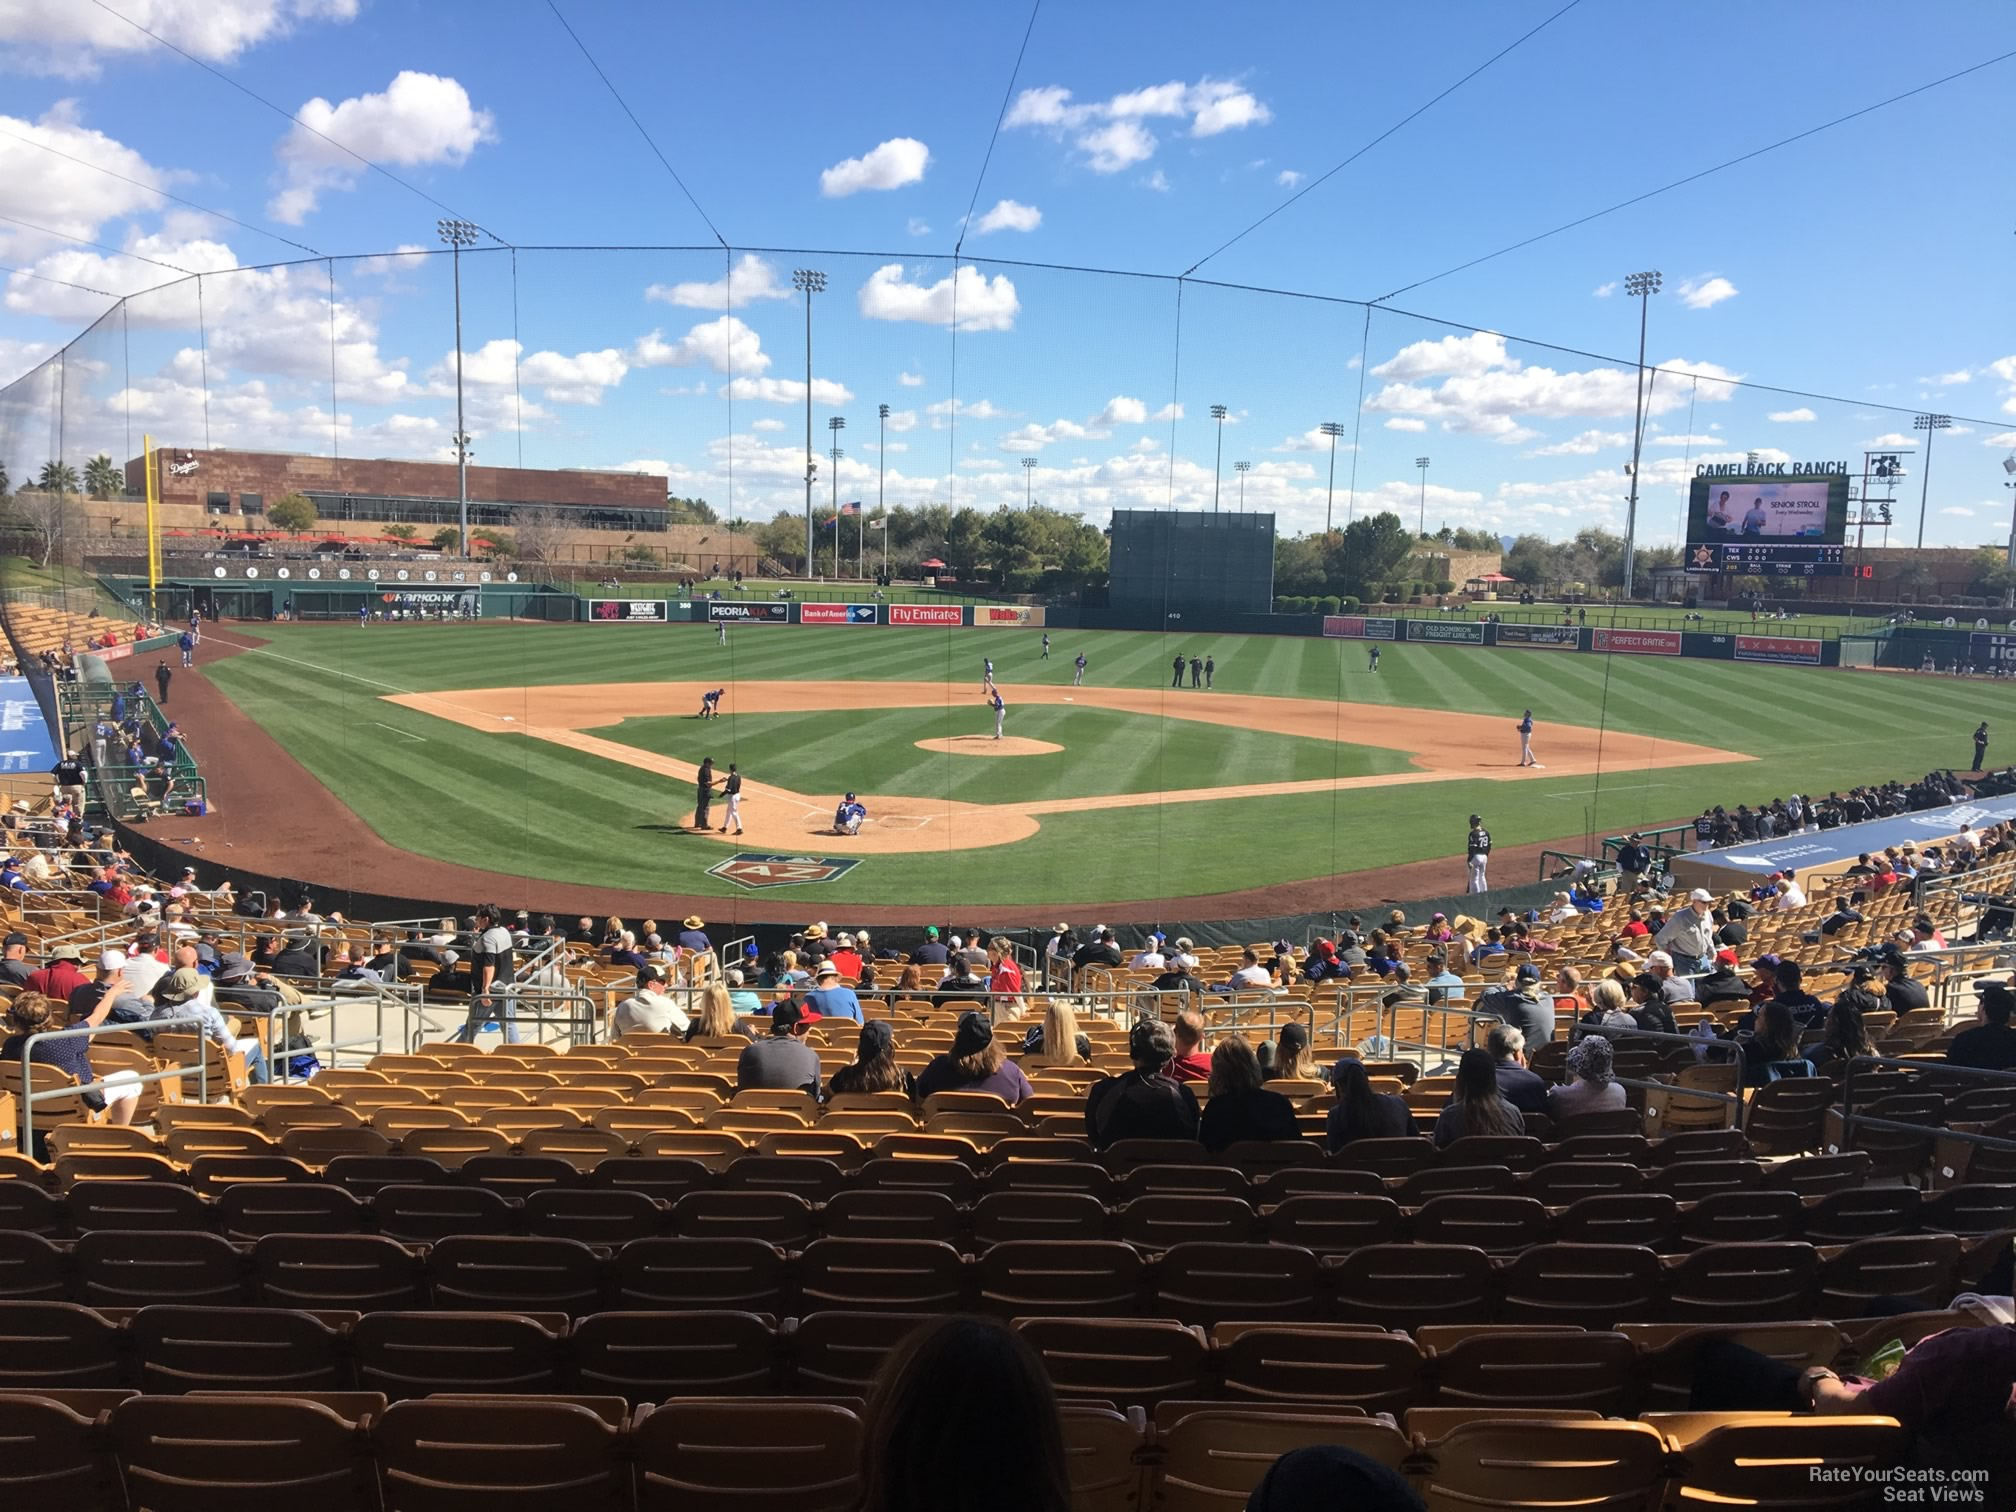 section 114, row 18 seat view  - camelback ranch